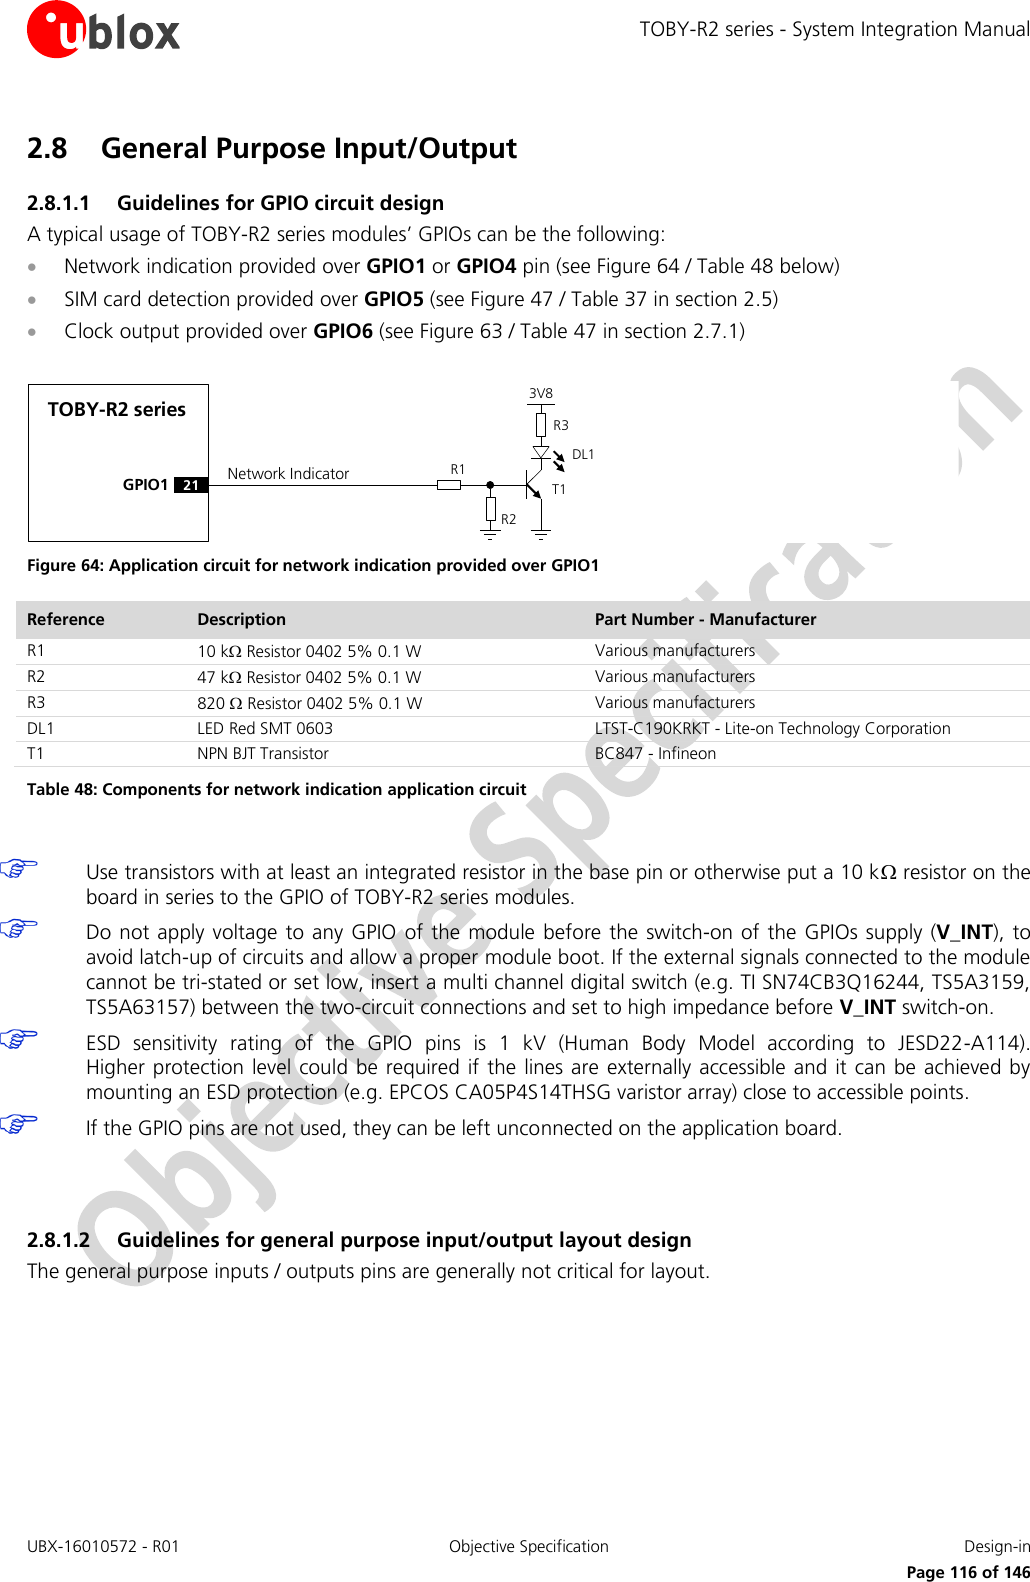 TOBY-R2 series - System Integration Manual UBX-16010572 - R01  Objective Specification  Design-in     Page 116 of 146 2.8 General Purpose Input/Output 2.8.1.1 Guidelines for GPIO circuit design A typical usage of TOBY-R2 series modules’ GPIOs can be the following:  Network indication provided over GPIO1 or GPIO4 pin (see Figure 64 / Table 48 below)  SIM card detection provided over GPIO5 (see Figure 47 / Table 37 in section 2.5)  Clock output provided over GPIO6 (see Figure 63 / Table 47 in section 2.7.1)  TOBY-R2 seriesGPIO1R1R33V8Network IndicatorR221DL1T1 Figure 64: Application circuit for network indication provided over GPIO1 Reference Description Part Number - Manufacturer R1 10 k Resistor 0402 5% 0.1 W Various manufacturers R2 47 k Resistor 0402 5% 0.1 W Various manufacturers R3 820  Resistor 0402 5% 0.1 W Various manufacturers DL1 LED Red SMT 0603 LTST-C190KRKT - Lite-on Technology Corporation T1 NPN BJT Transistor BC847 - Infineon Table 48: Components for network indication application circuit   Use transistors with at least an integrated resistor in the base pin or otherwise put a 10 k resistor on the board in series to the GPIO of TOBY-R2 series modules.  Do not apply voltage  to  any GPIO  of  the module before the switch-on of the GPIOs supply (V_INT),  to avoid latch-up of circuits and allow a proper module boot. If the external signals connected to the module cannot be tri-stated or set low, insert a multi channel digital switch (e.g. TI SN74CB3Q16244, TS5A3159, TS5A63157) between the two-circuit connections and set to high impedance before V_INT switch-on.  ESD  sensitivity  rating  of  the  GPIO  pins  is  1  kV  (Human  Body  Model  according  to  JESD22-A114).  Higher protection level could  be  required if the lines are externally accessible and it can be  achieved by mounting an ESD protection (e.g. EPCOS CA05P4S14THSG varistor array) close to accessible points.  If the GPIO pins are not used, they can be left unconnected on the application board.   2.8.1.2 Guidelines for general purpose input/output layout design The general purpose inputs / outputs pins are generally not critical for layout.  